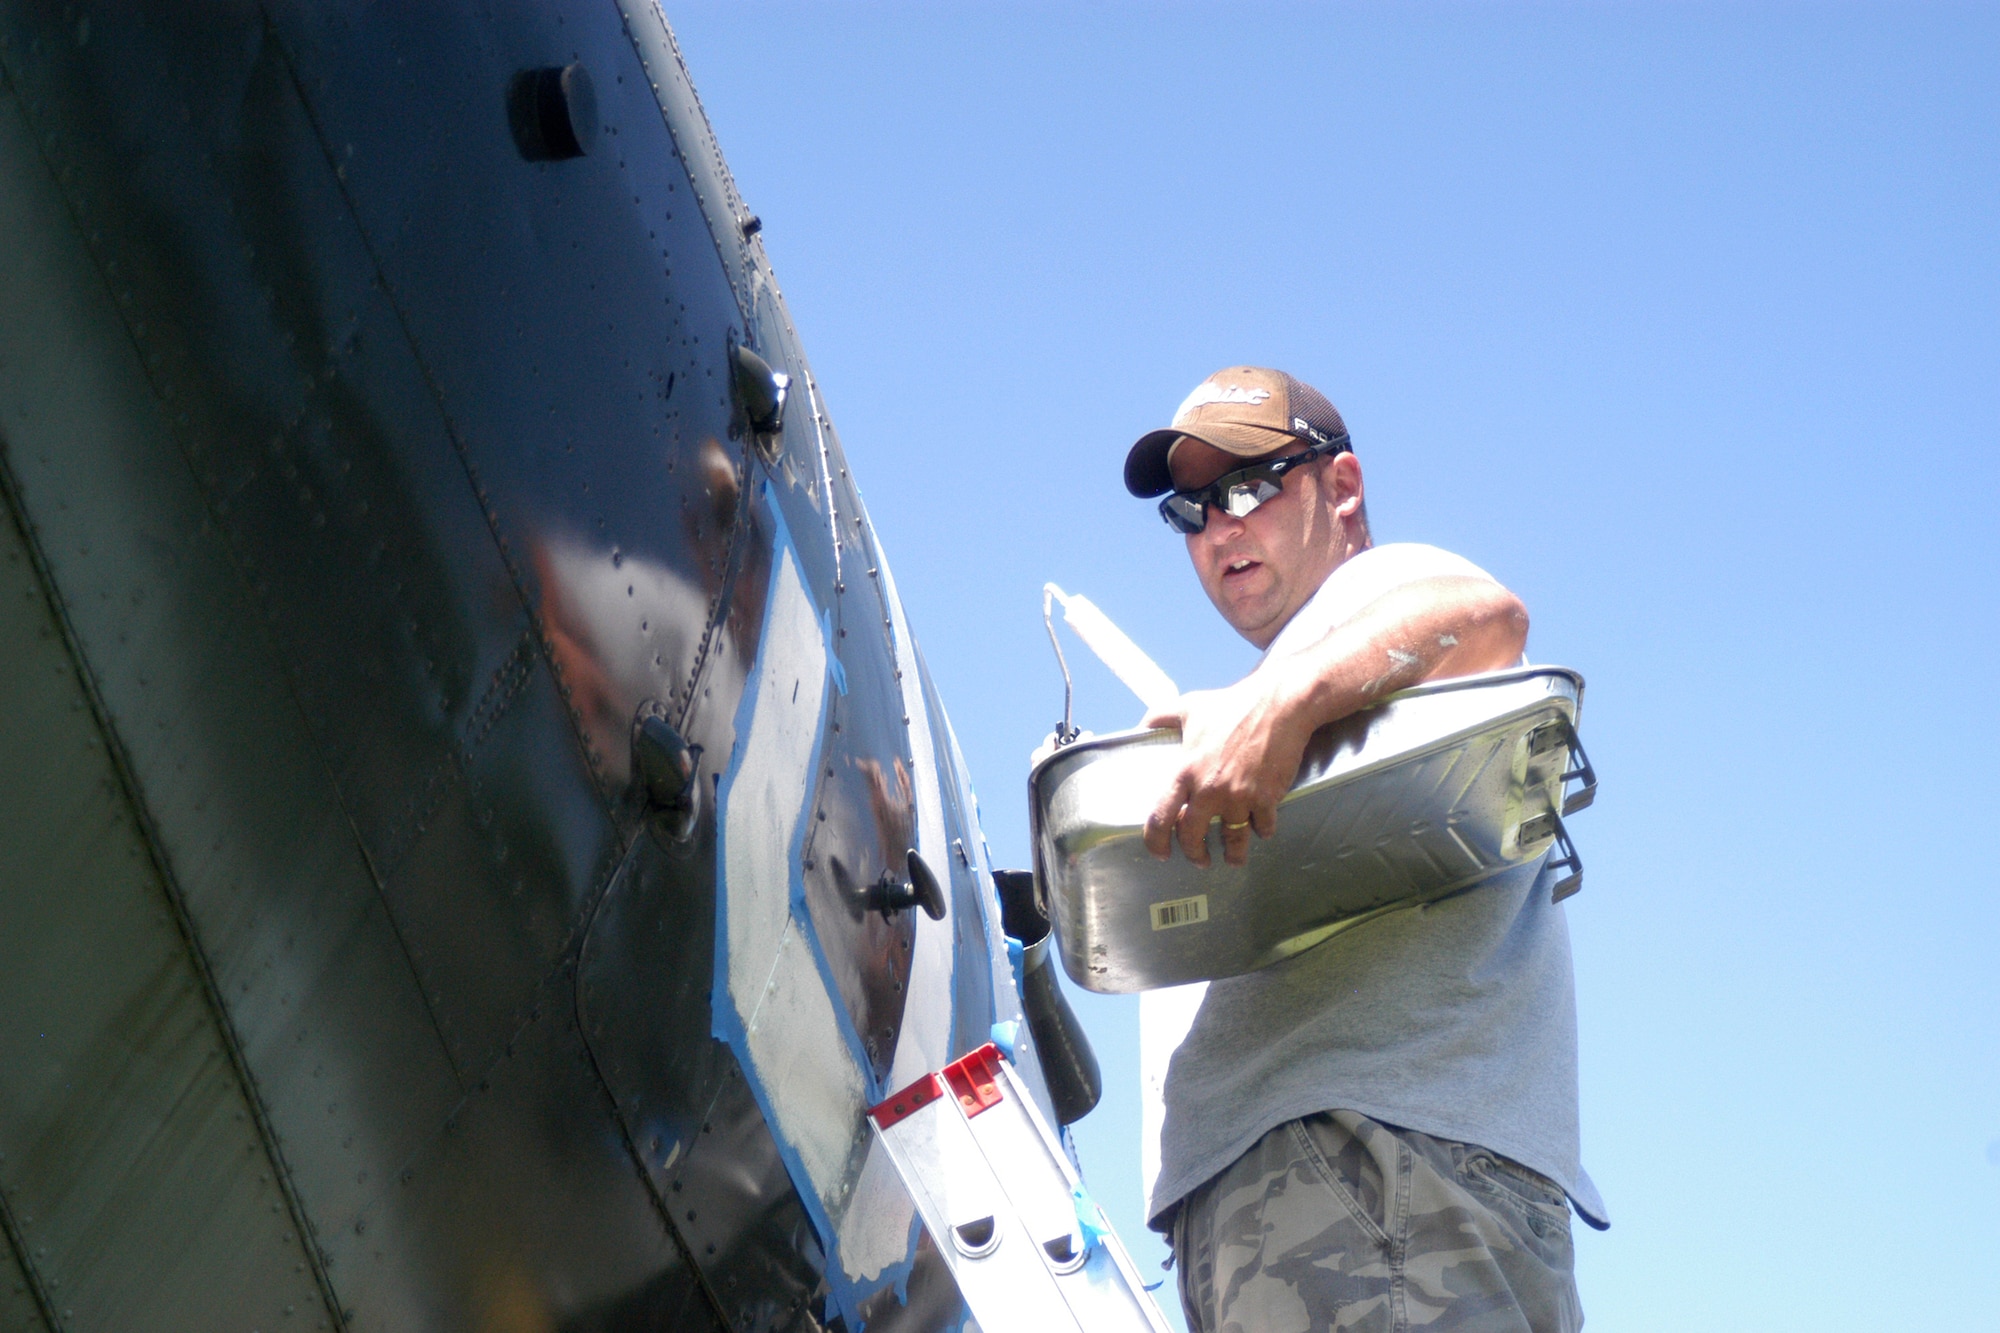 Air Force Master Sgt. Scott McCoy, 19th Air Support Operations Squadron first sergeant, paints historical markings on the C-47 with tail number 42-100828. The C-47, currently on display at Fort Campbell, Ky., is a significant part of the 101st Airborne Division's World War II history. The plane was involved in every major airborne and glider-borne assault in the European Theater of operations, to include Operations DRAGOON, MARKET-GARDEN and VARSITY. The aircraft also dropped paratroopers from the 506th Parachute Infantry Regiment, now known as the 4th Brigade Combat Team, "Currahees," into Drop Zone "C" at J+30, roughly 1:15 a.m. June 6, 1944.  The restoration will take approximately 10 days with a total of 500 hours to restore the aircraft’s exterior. (U.S. Army photo by Nondice Thurman)